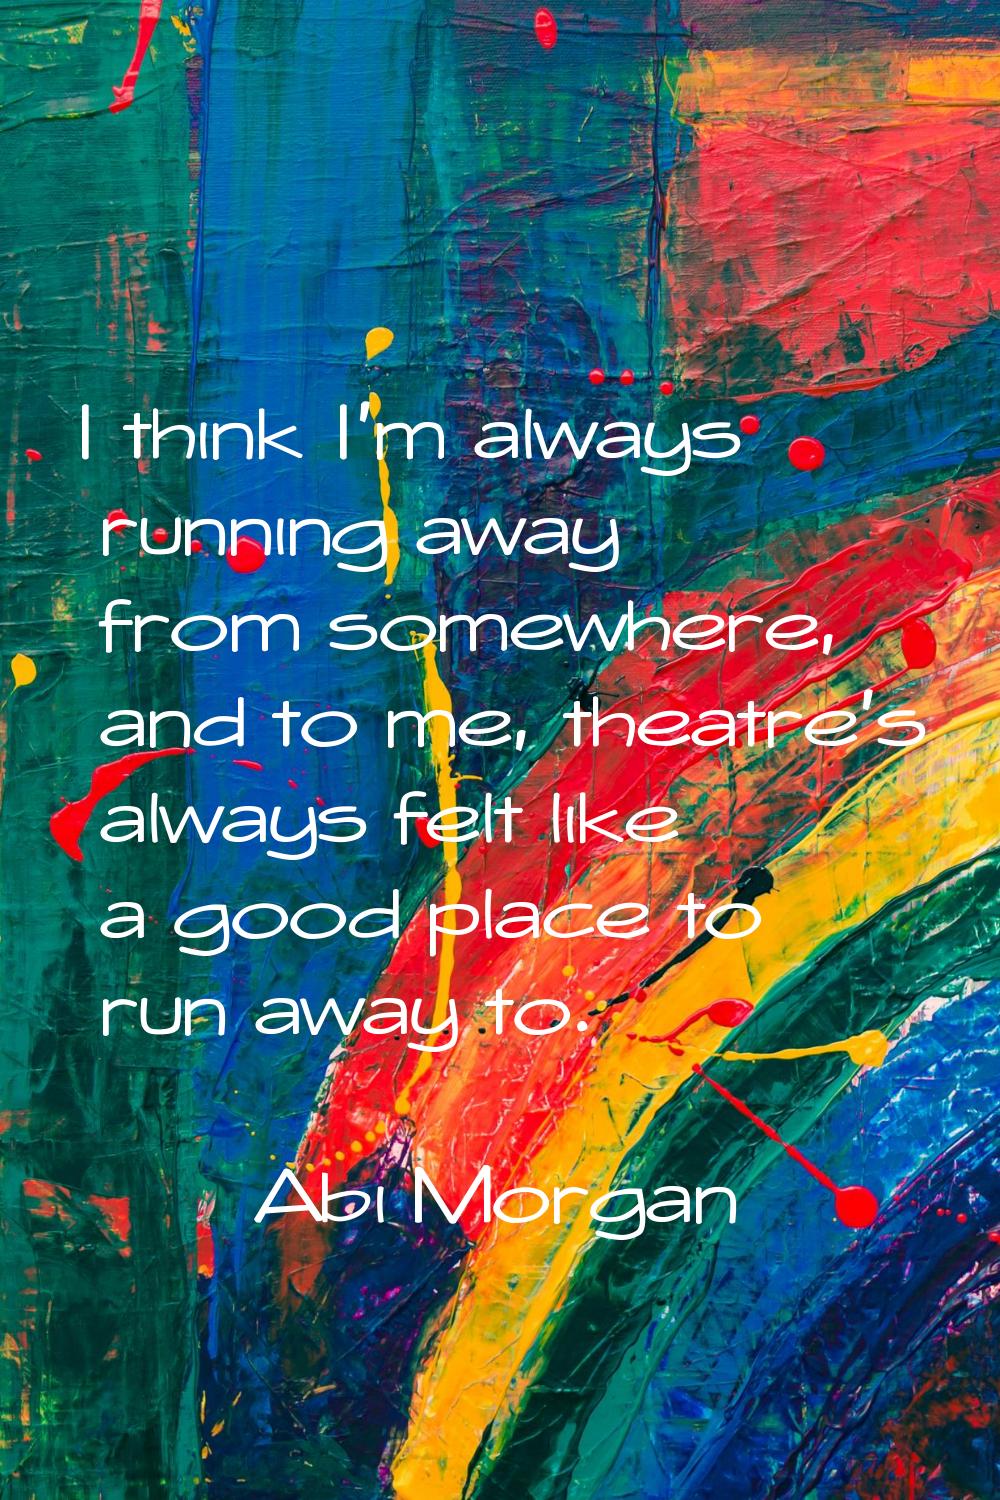 I think I'm always running away from somewhere, and to me, theatre's always felt like a good place 